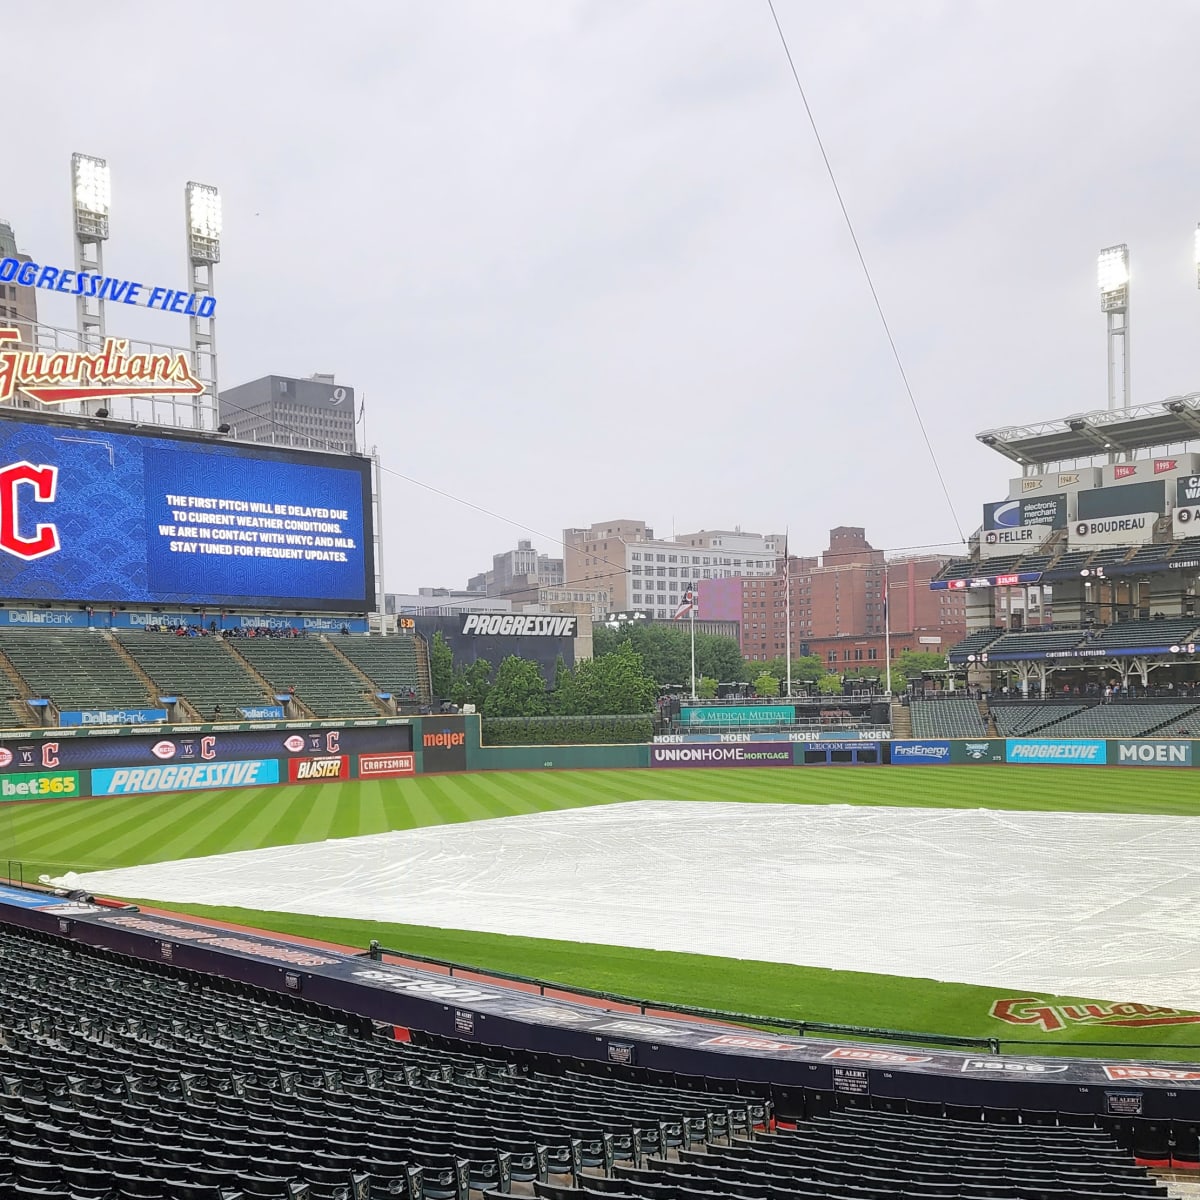 Cleveland Indians game postponed due to weather